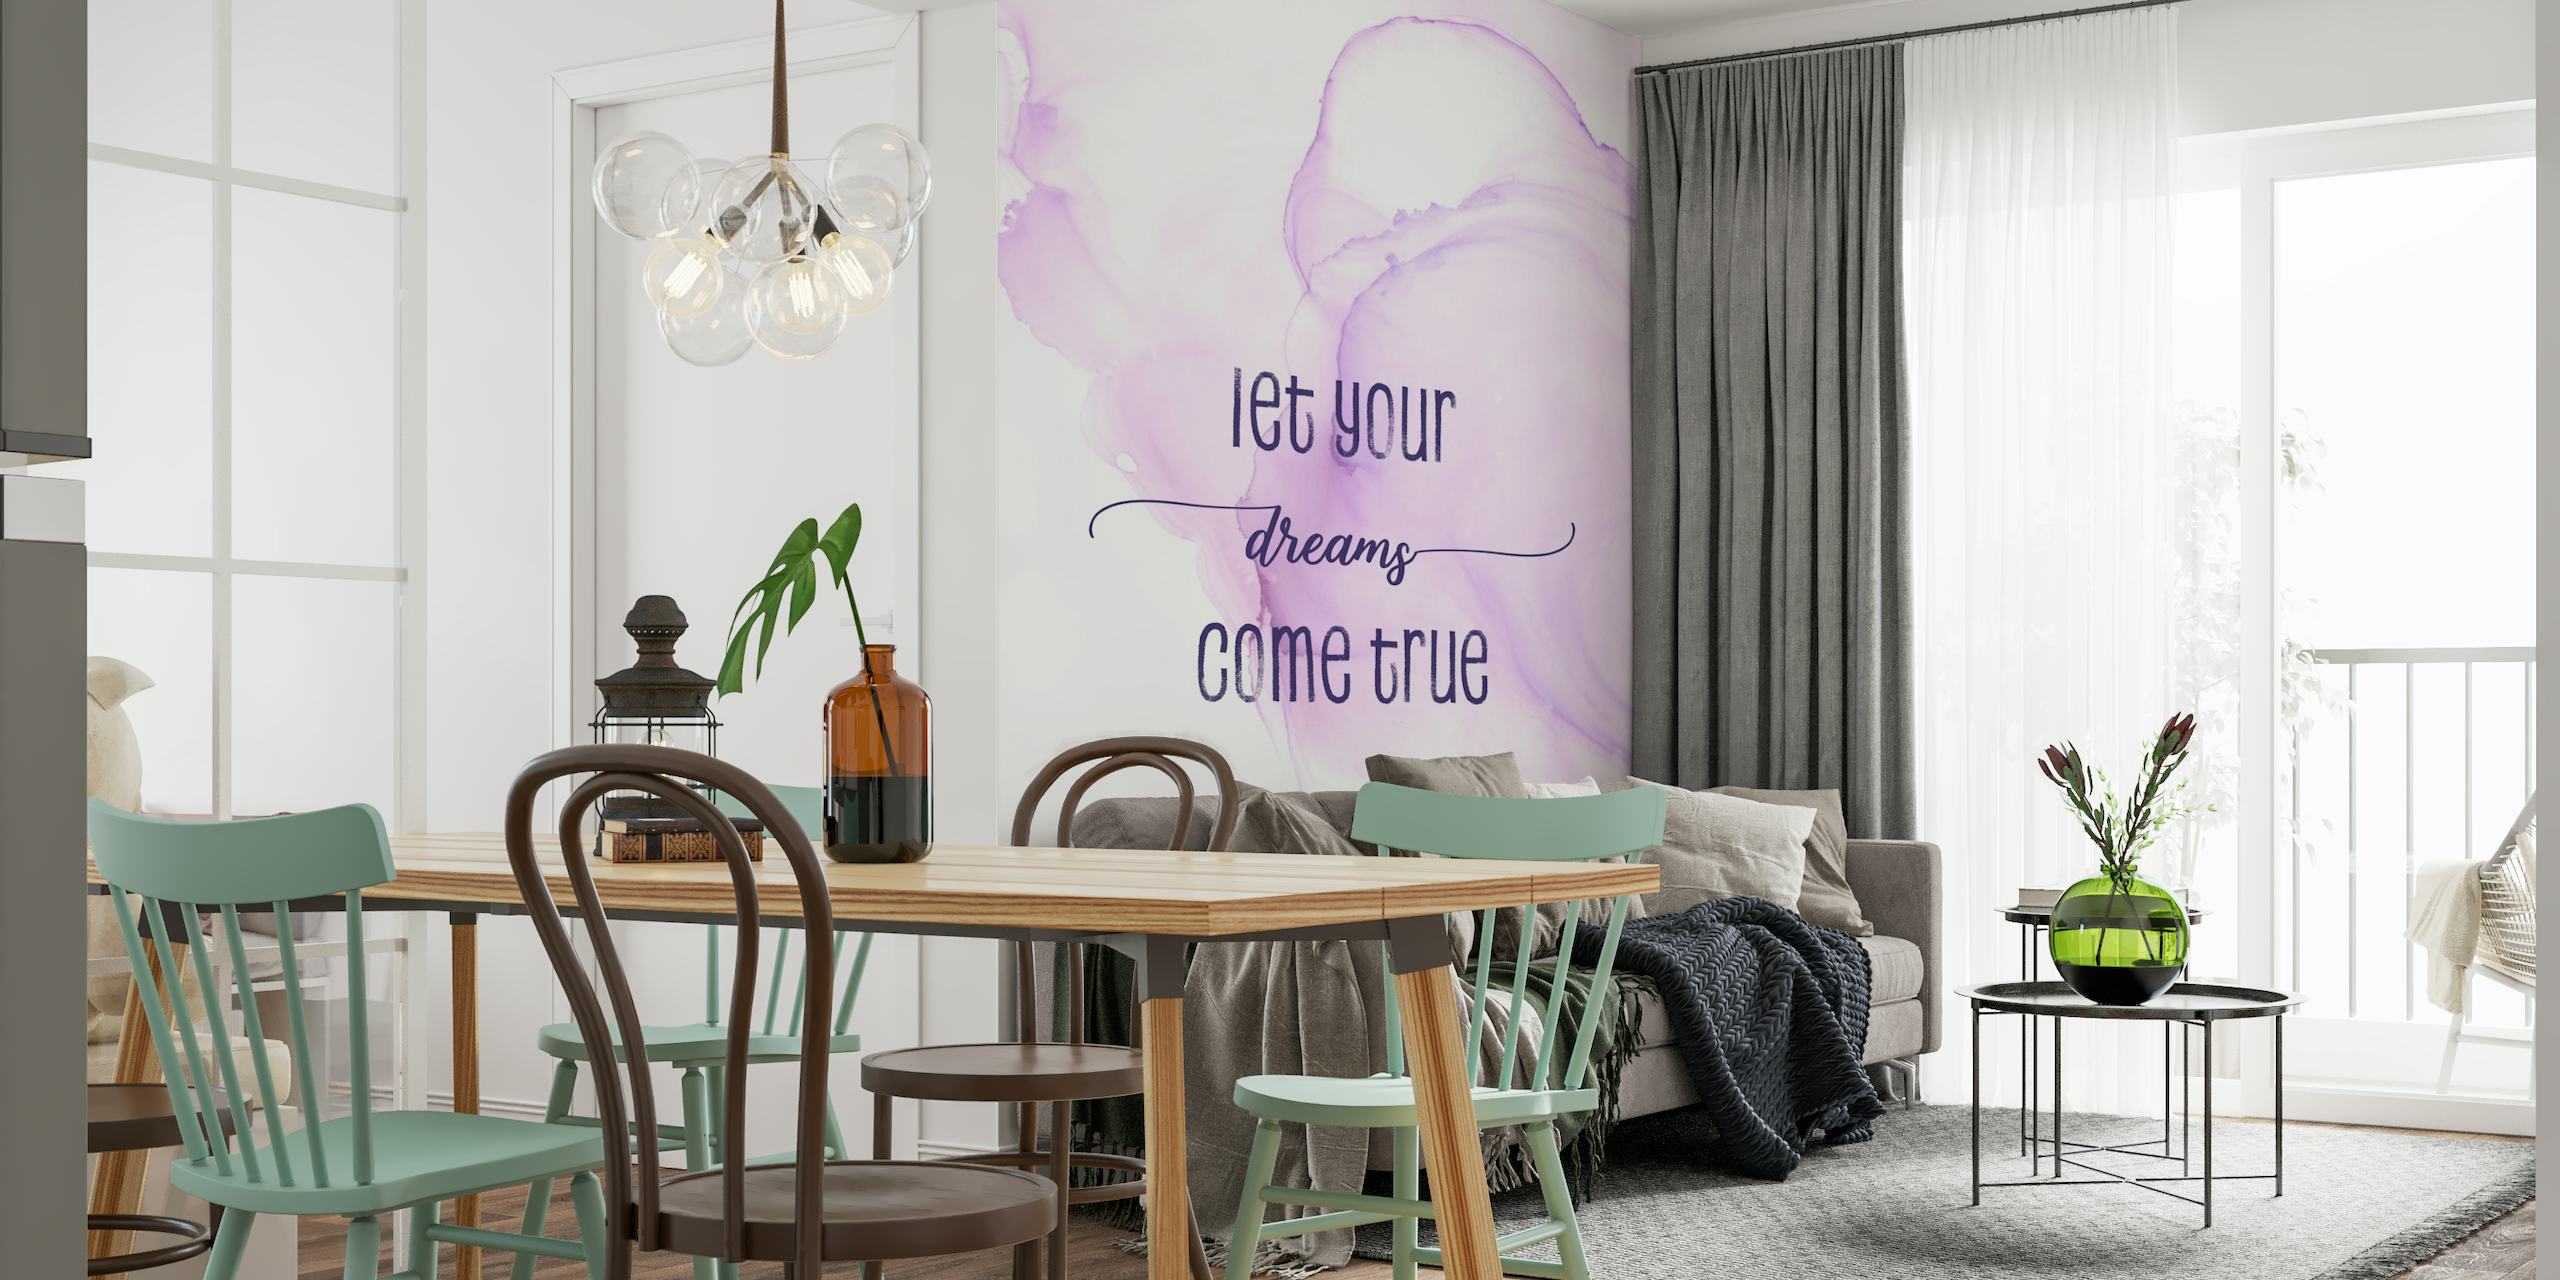 Inspirational 'Let Your Dreams Come True' calligraphy on a soft purple and pink watercolor background wall mural